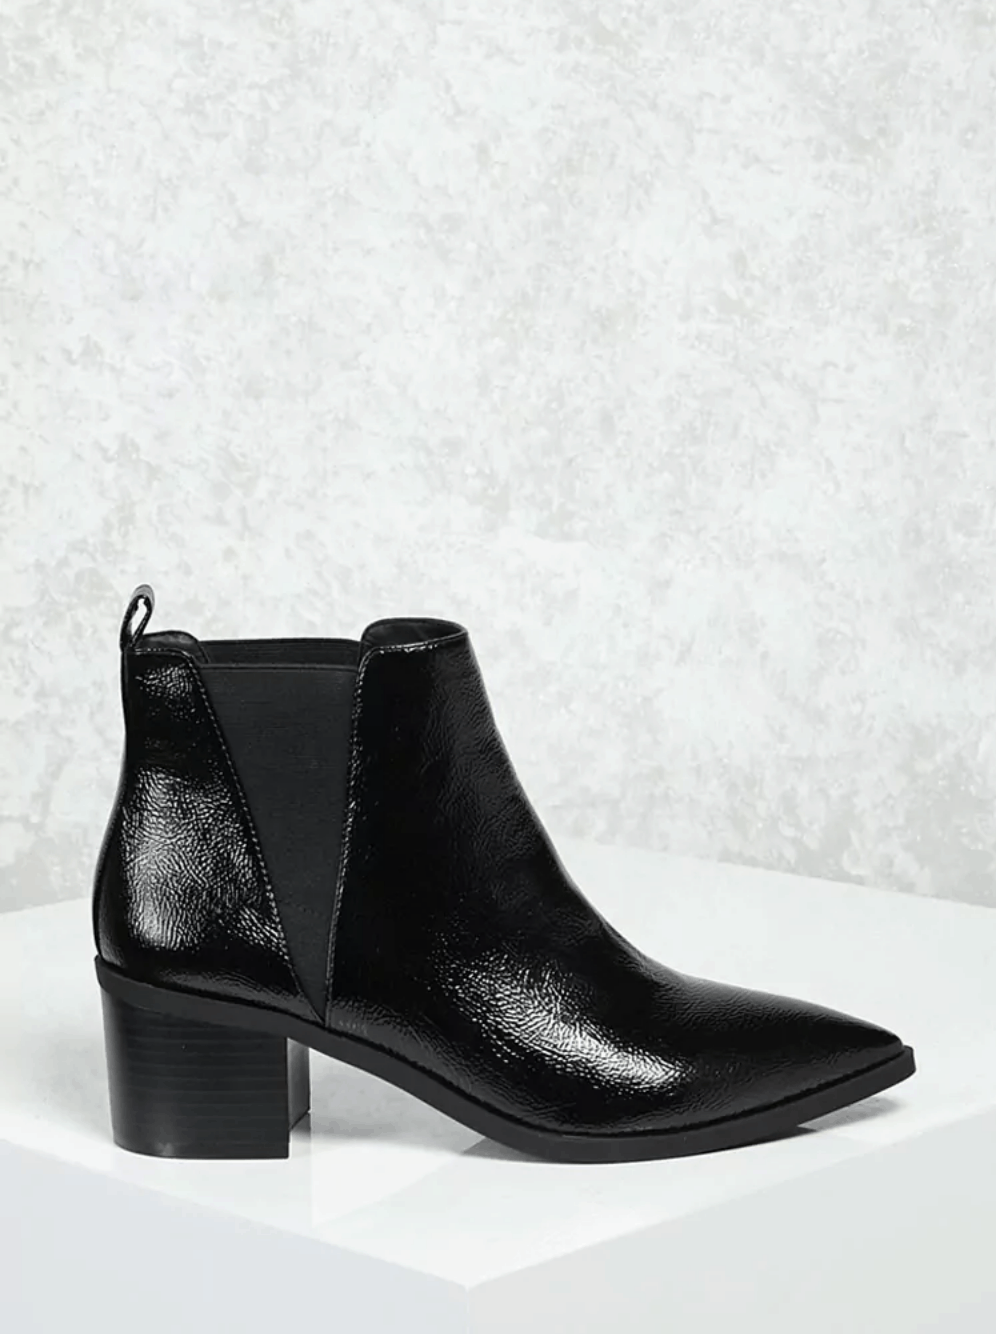 Forever 21 ankle boots